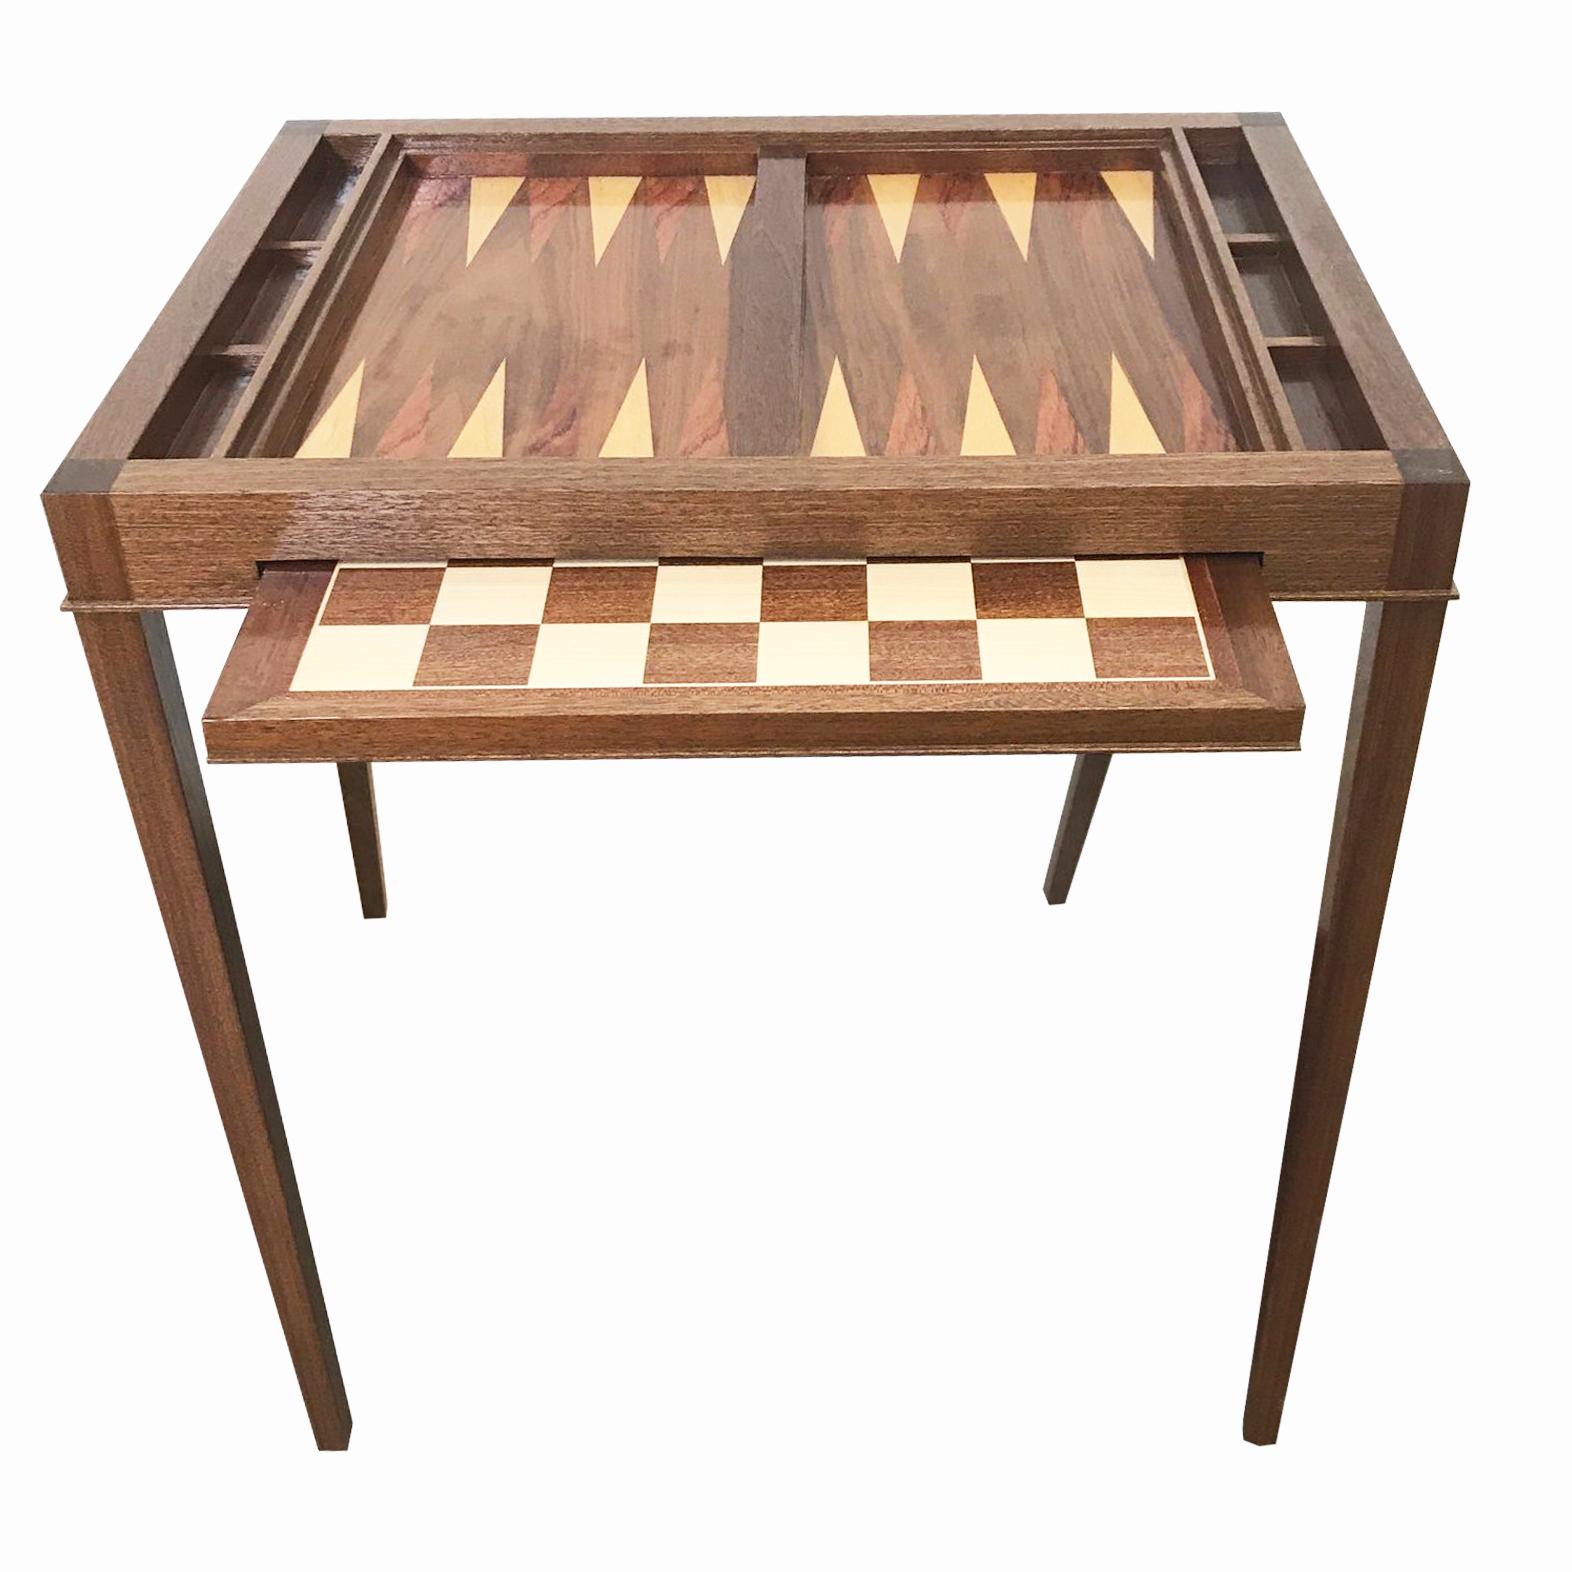 Sold. New listing is being posted. Custom walnut Backgammon table that converts to chess with a slide out board. 

New production. Made to order in walnut or mahogany. Designed and made in NYC-- each table is handcrafted within NYC and has unique